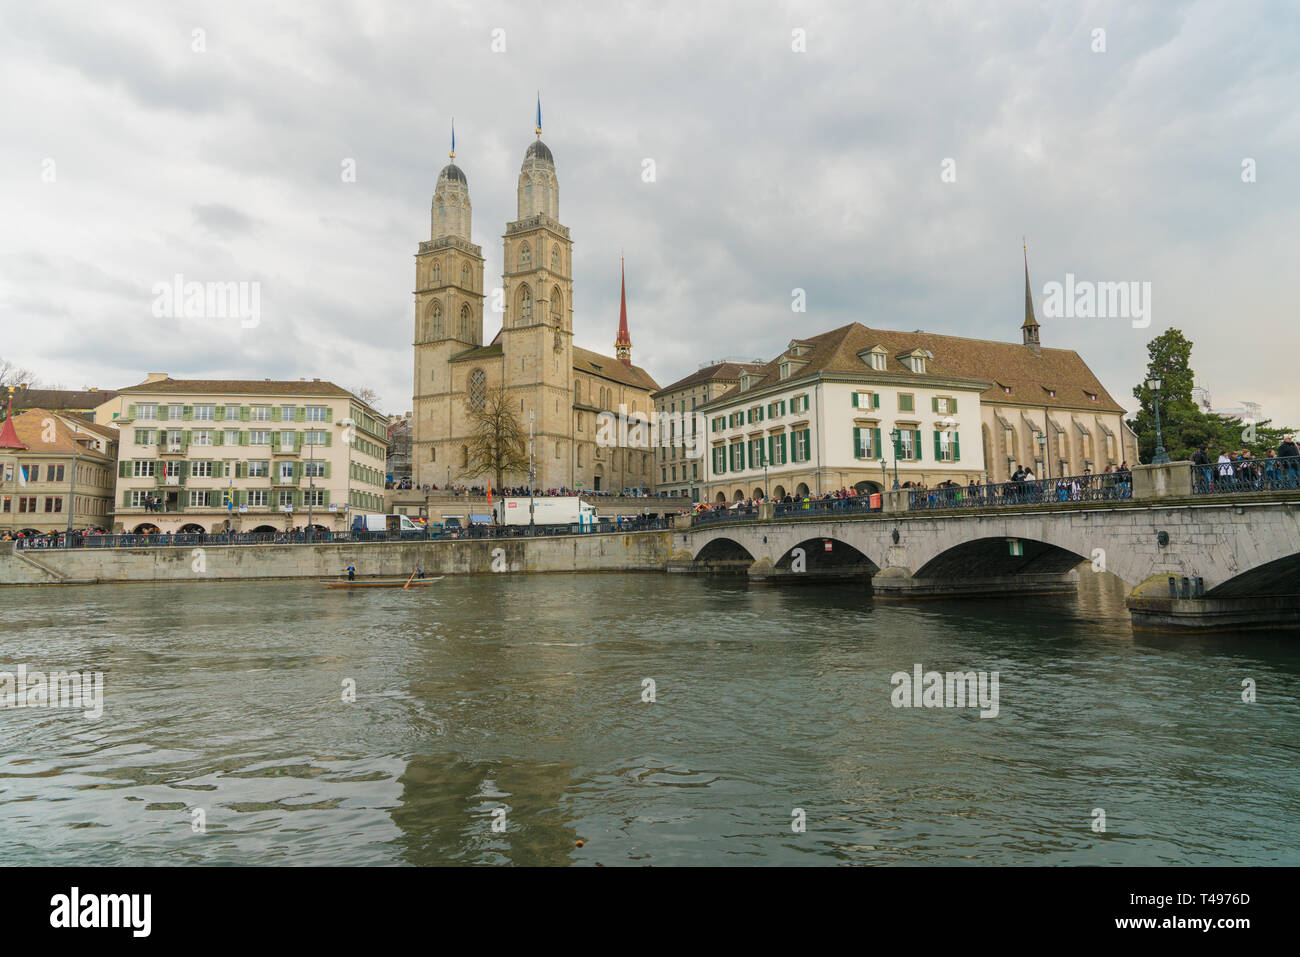 Zurich, ZH / Switzerland - April 8, 2019: Zurich cityscape with many people leaving at the end of the traditional spring festival of Sechselauten in A Stock Photo